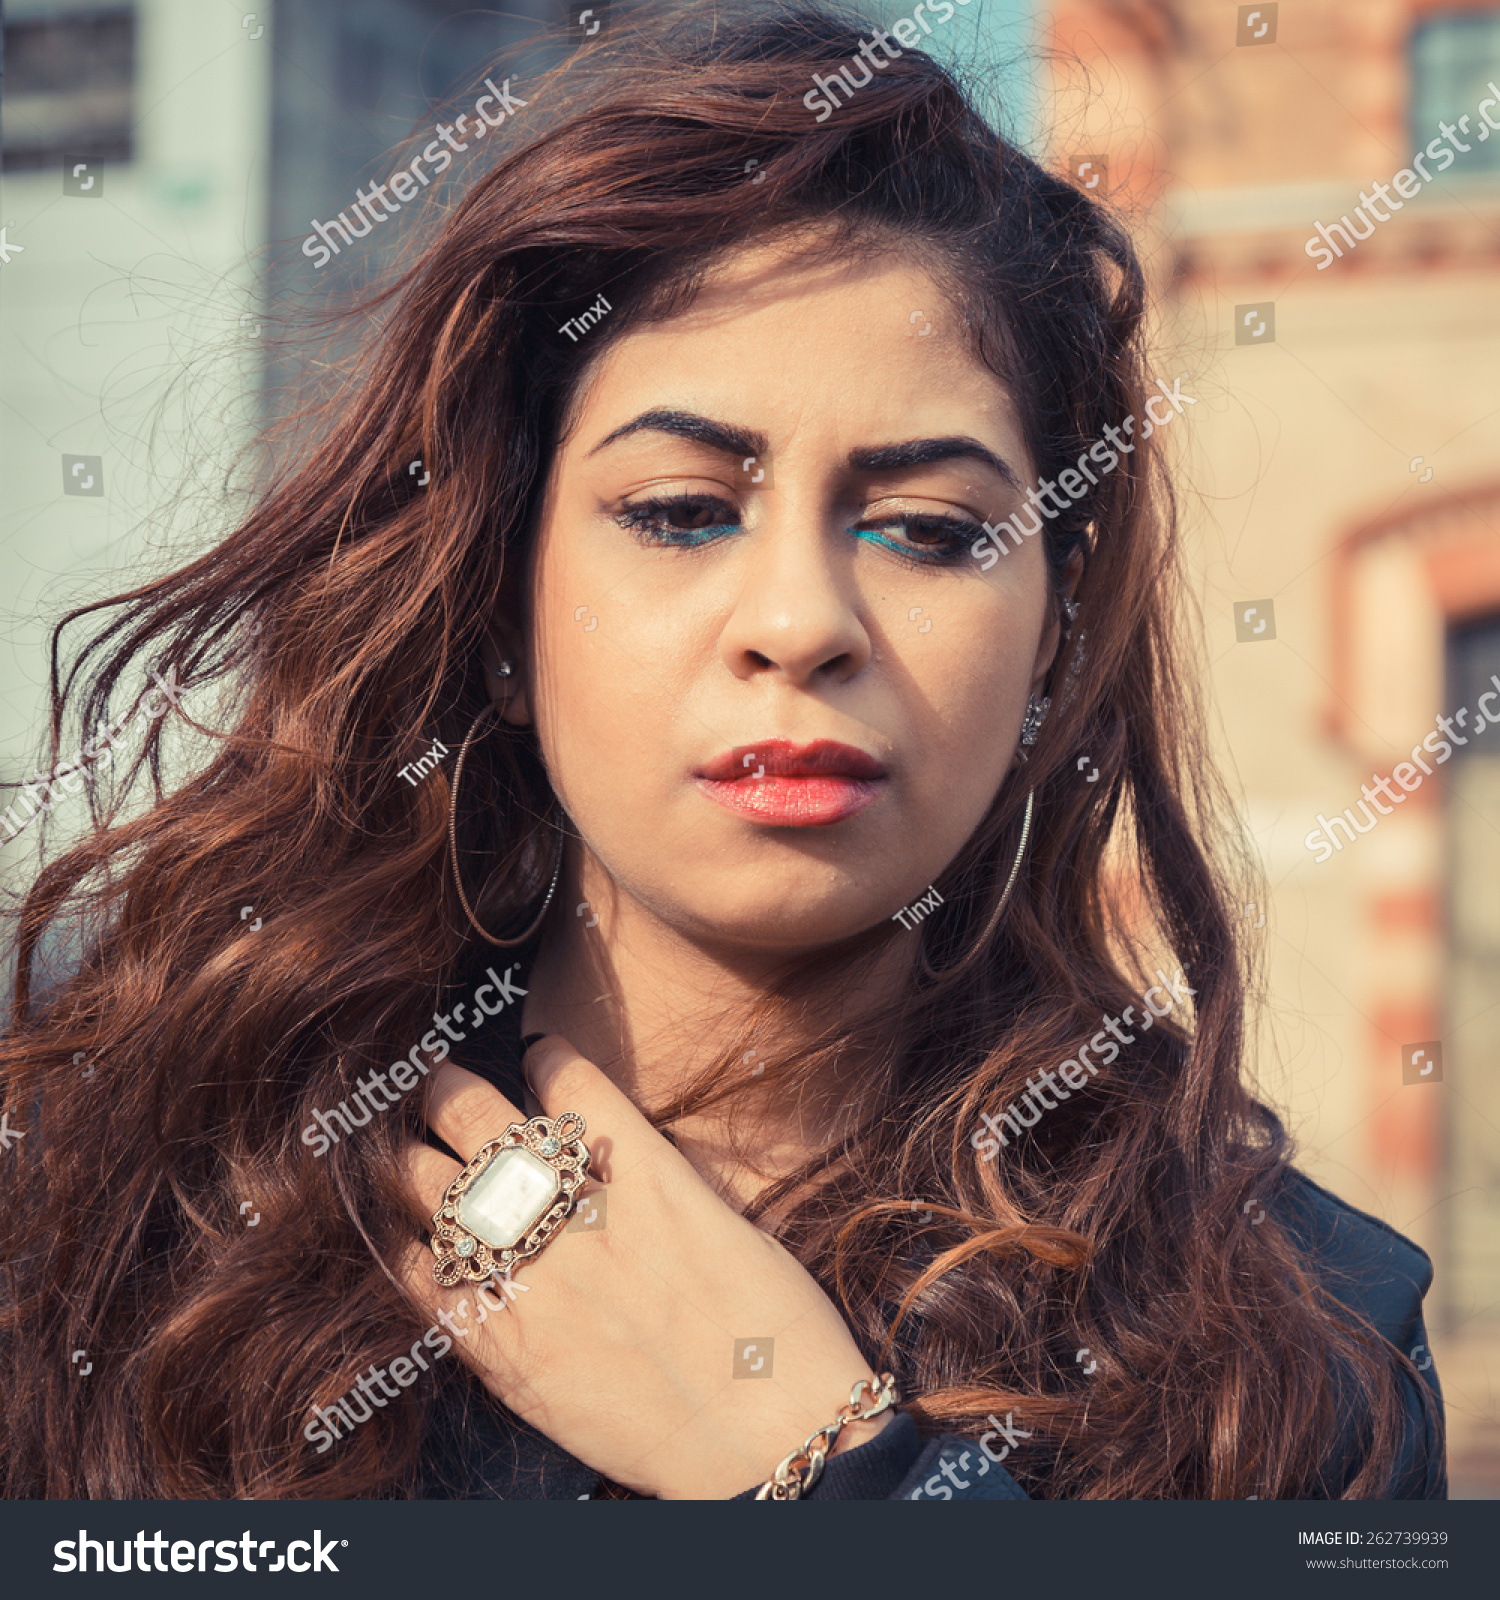 Beautiful Middle Eastern Girl Long Hair Stock Photo 262739939 ...